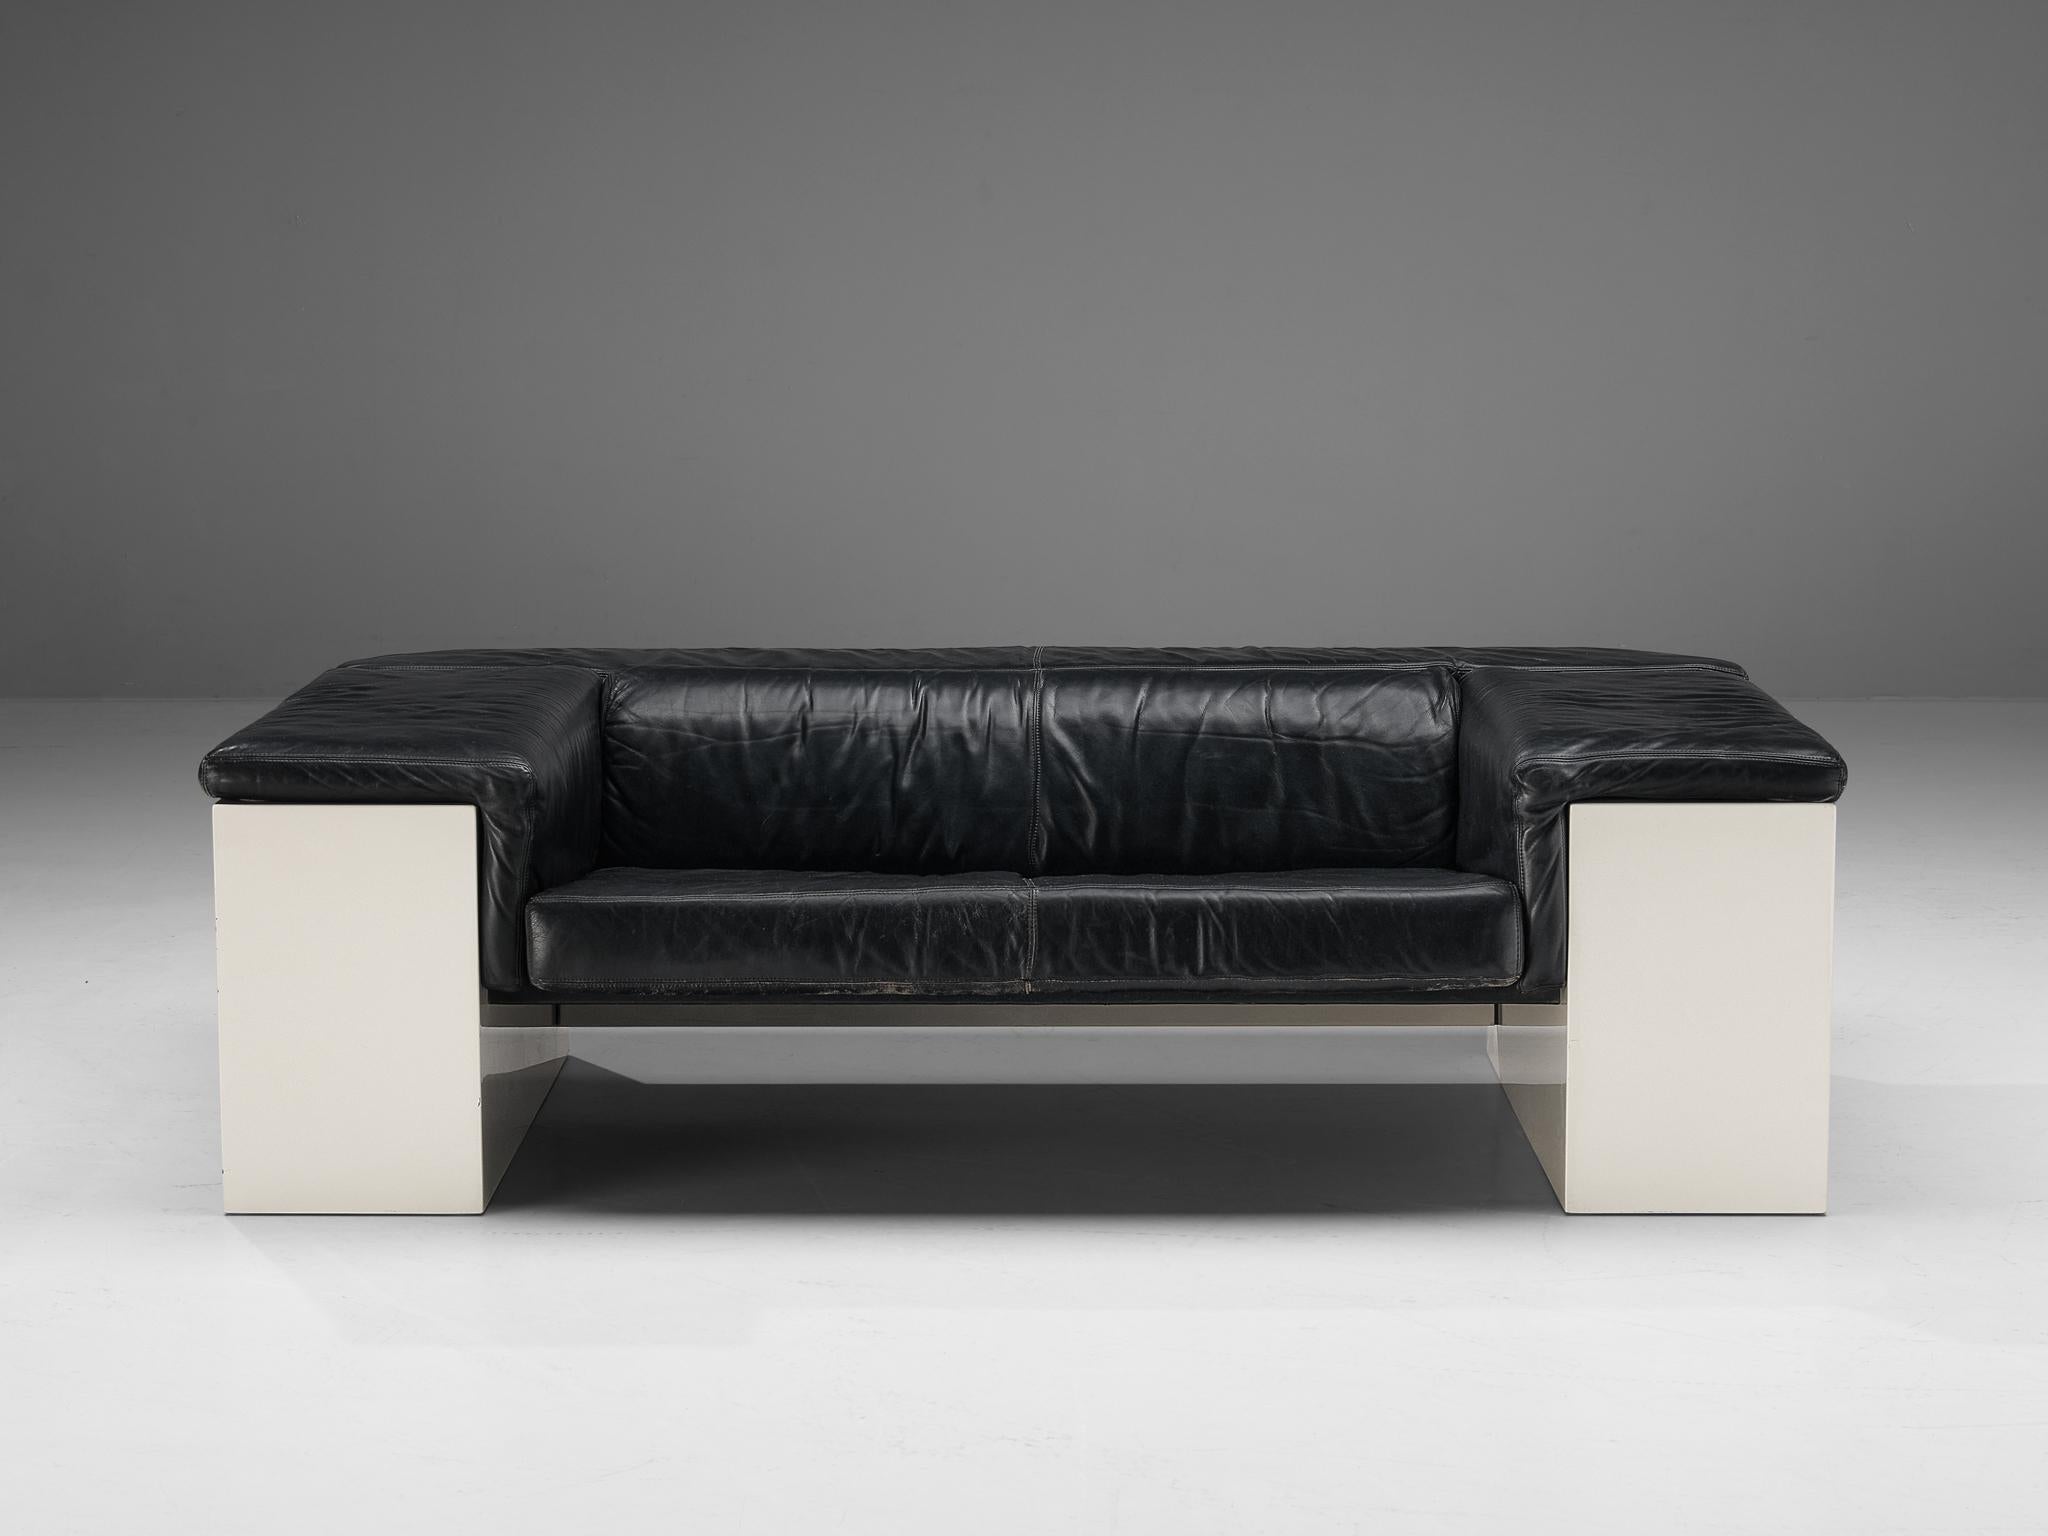 Cini Boeri for Knoll, sofa, model 'Brigadiere', leather, lacquered wood, Italy, 1976. 

Architectural sofa model 'Brigadiere' designed by Italian designer Cini Boeri for Knoll. This postmodern sofa is executed in refined black leather cushions which